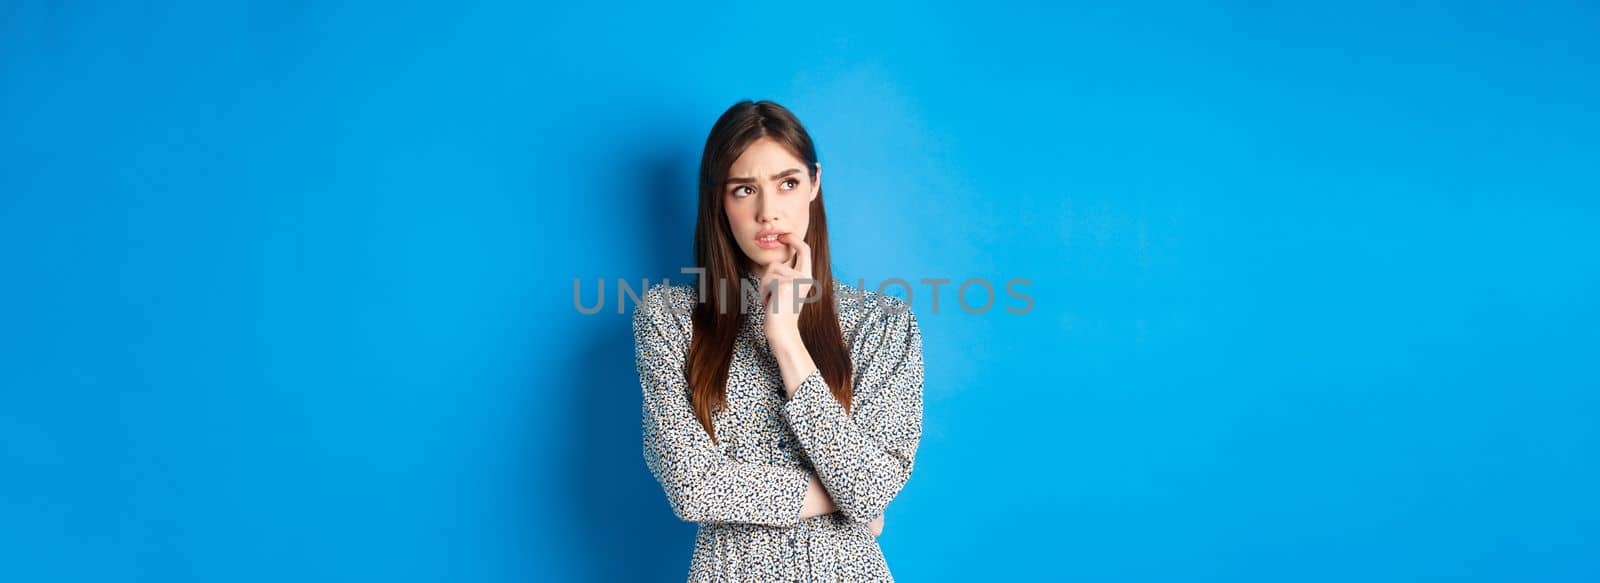 Troubled pensive girl looking aside at logo, biting fingernail and thinking, standing on blue background in long dress.